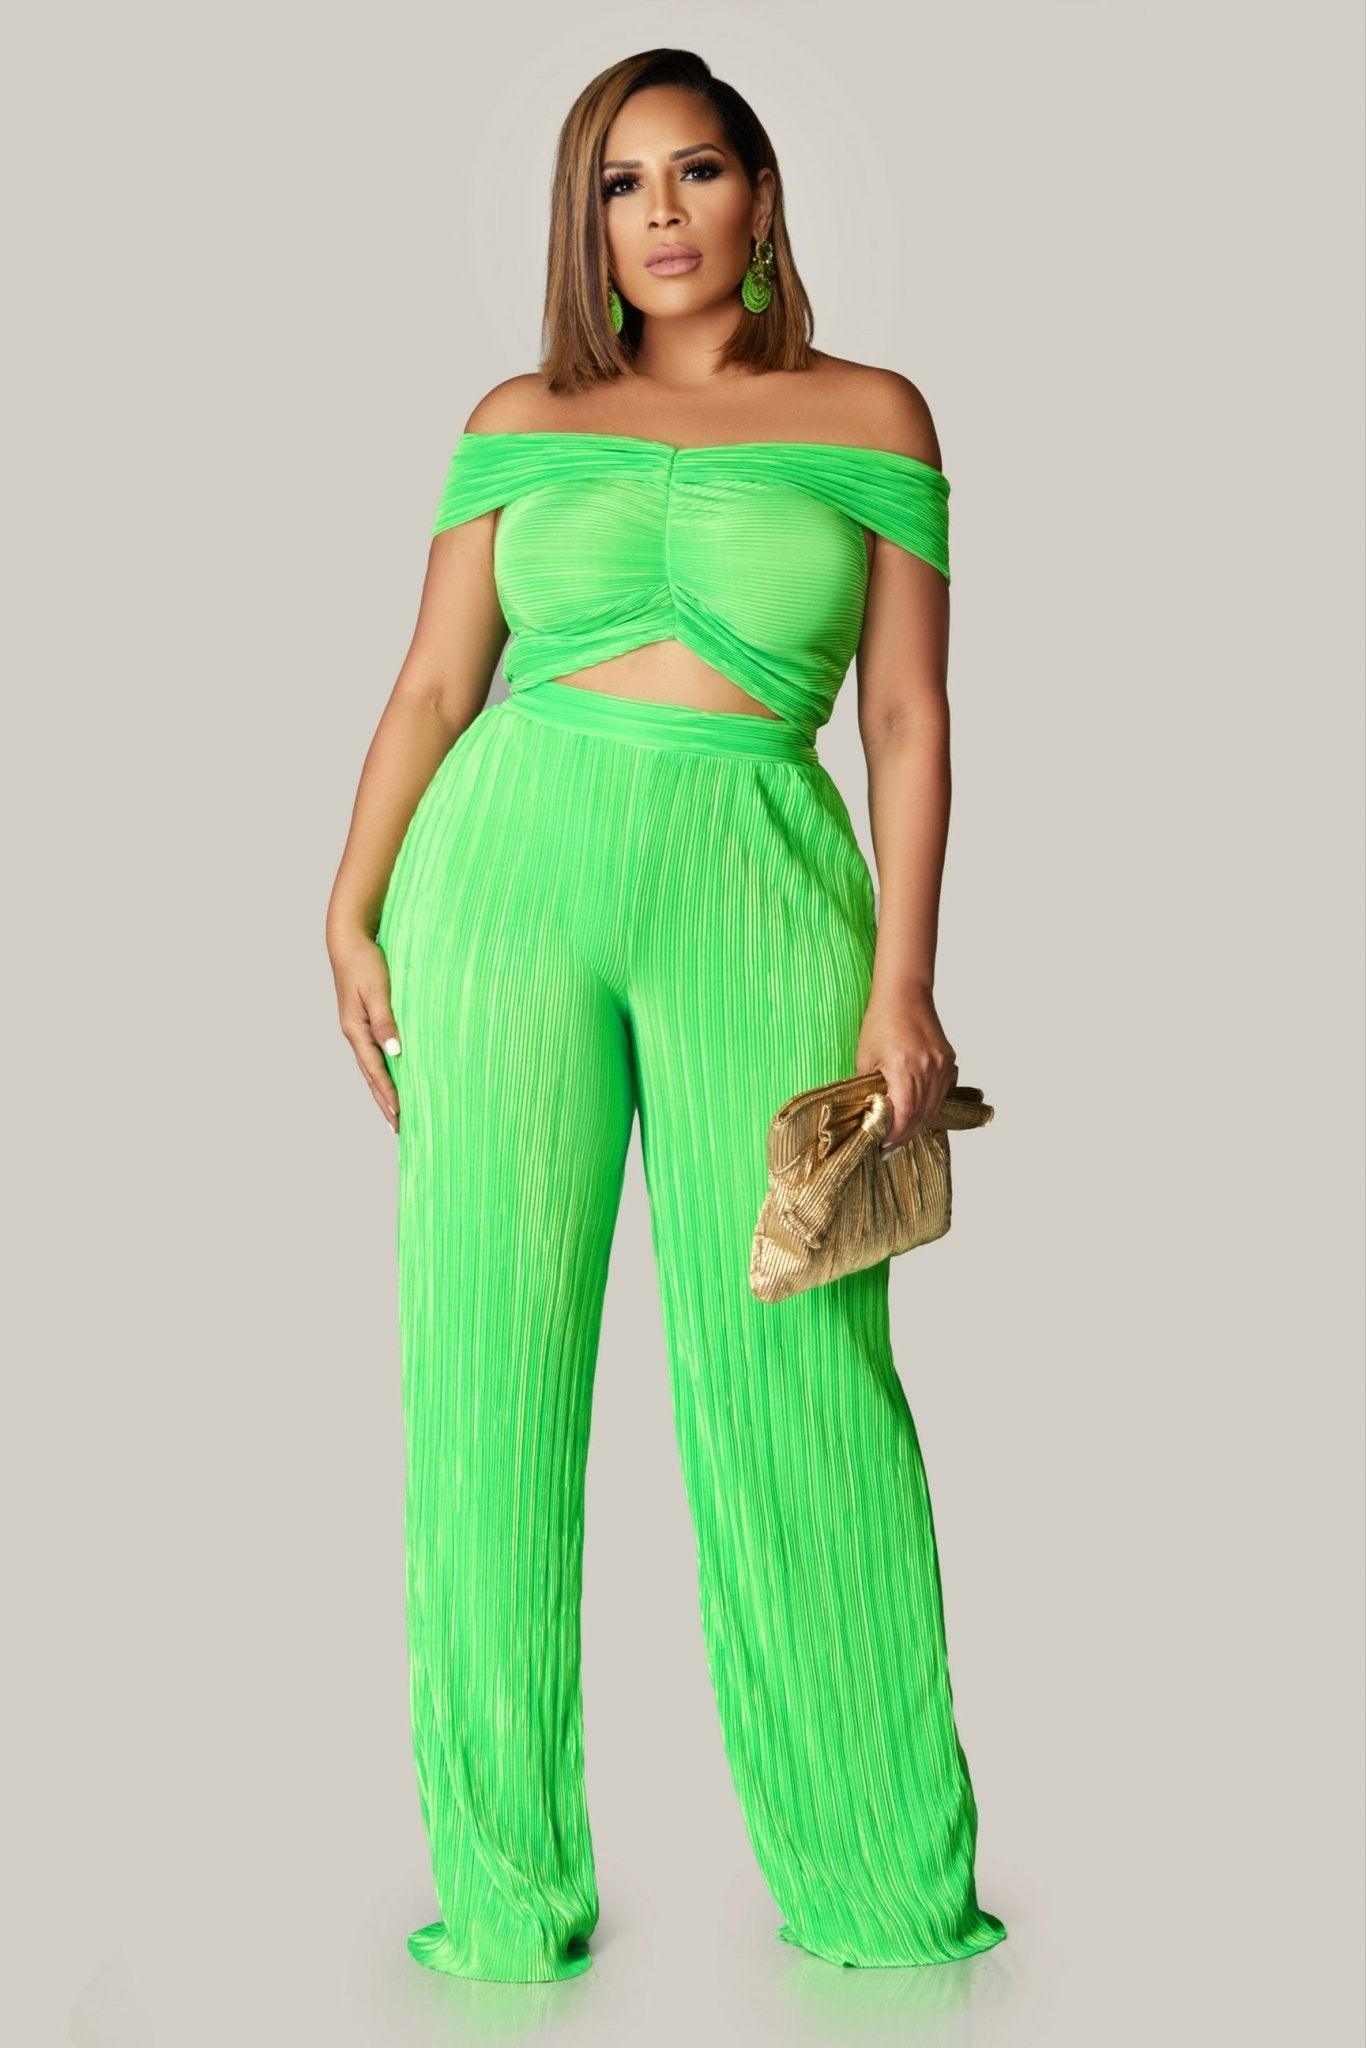 Seraphina Off Shoulder Neon Lime Green Pleated Pants Set - MY SEXY STYLES